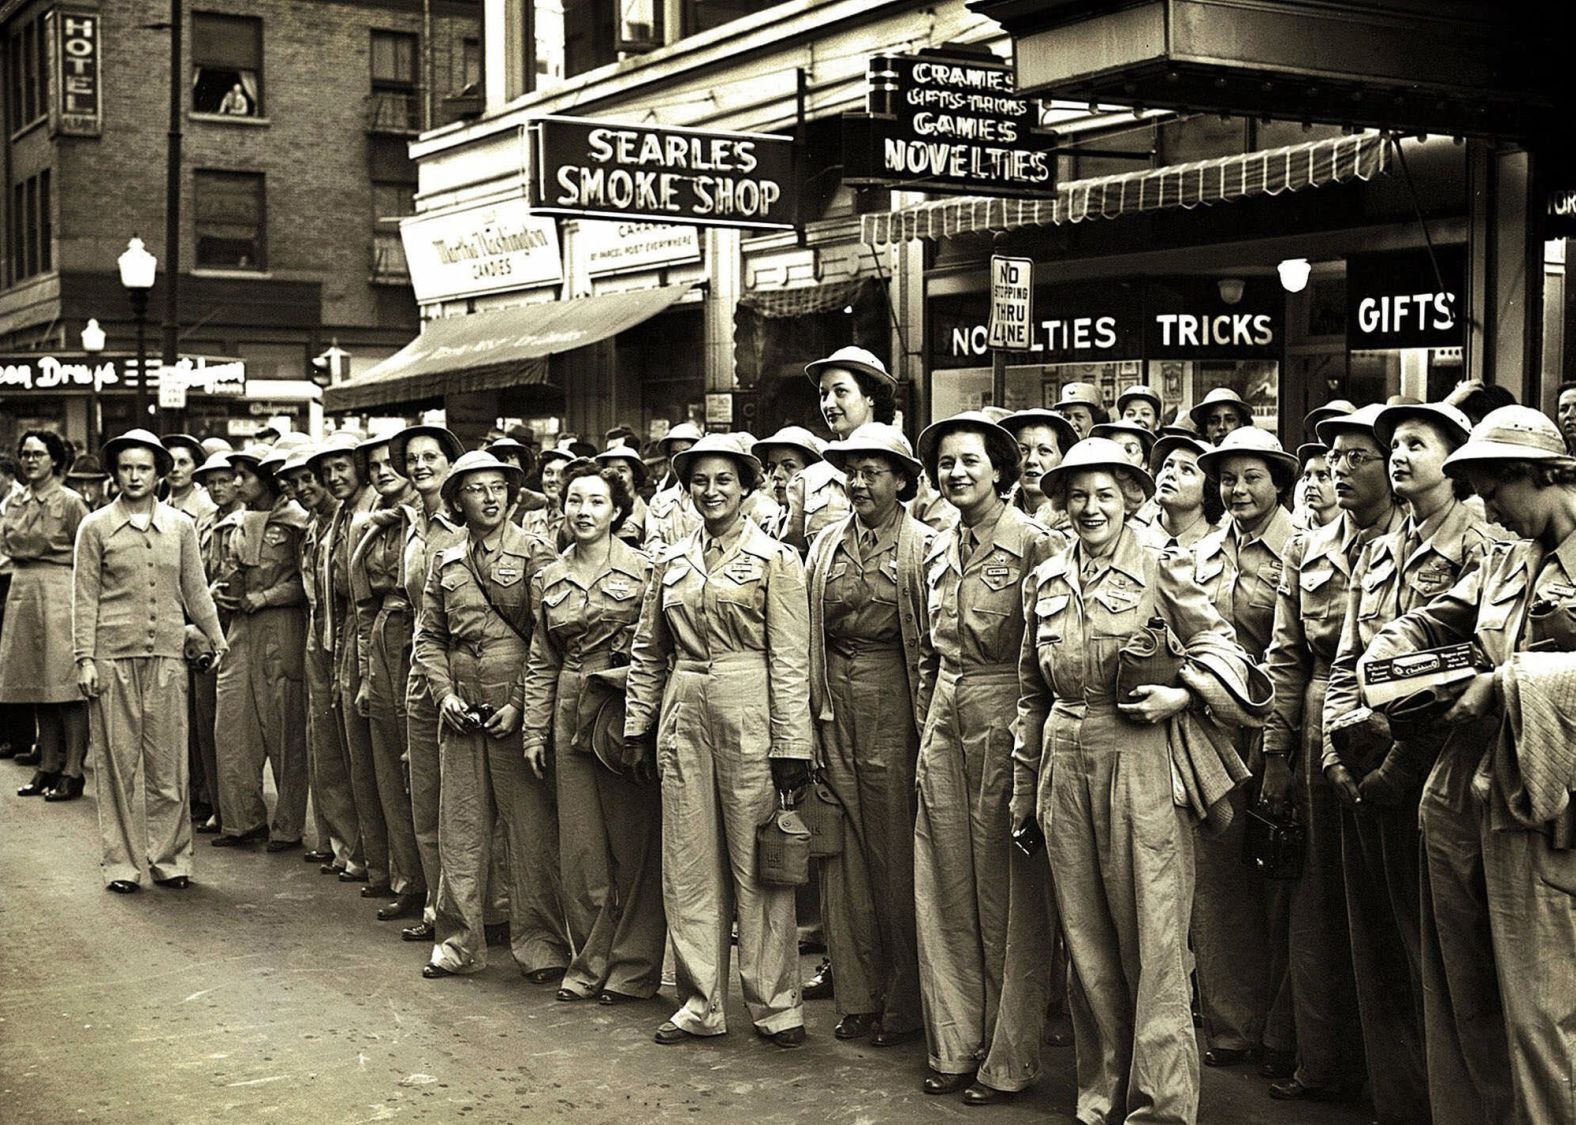 Women with the Army Auxiliary Corps wait for a trolley in downtown Des Moines, Iowa, five months after Congress passed a bill authorizing non-combat military duty for women. The 1942 legislation effectively allowed women to join the war effort in roles such as radio operators and air traffic controllers.